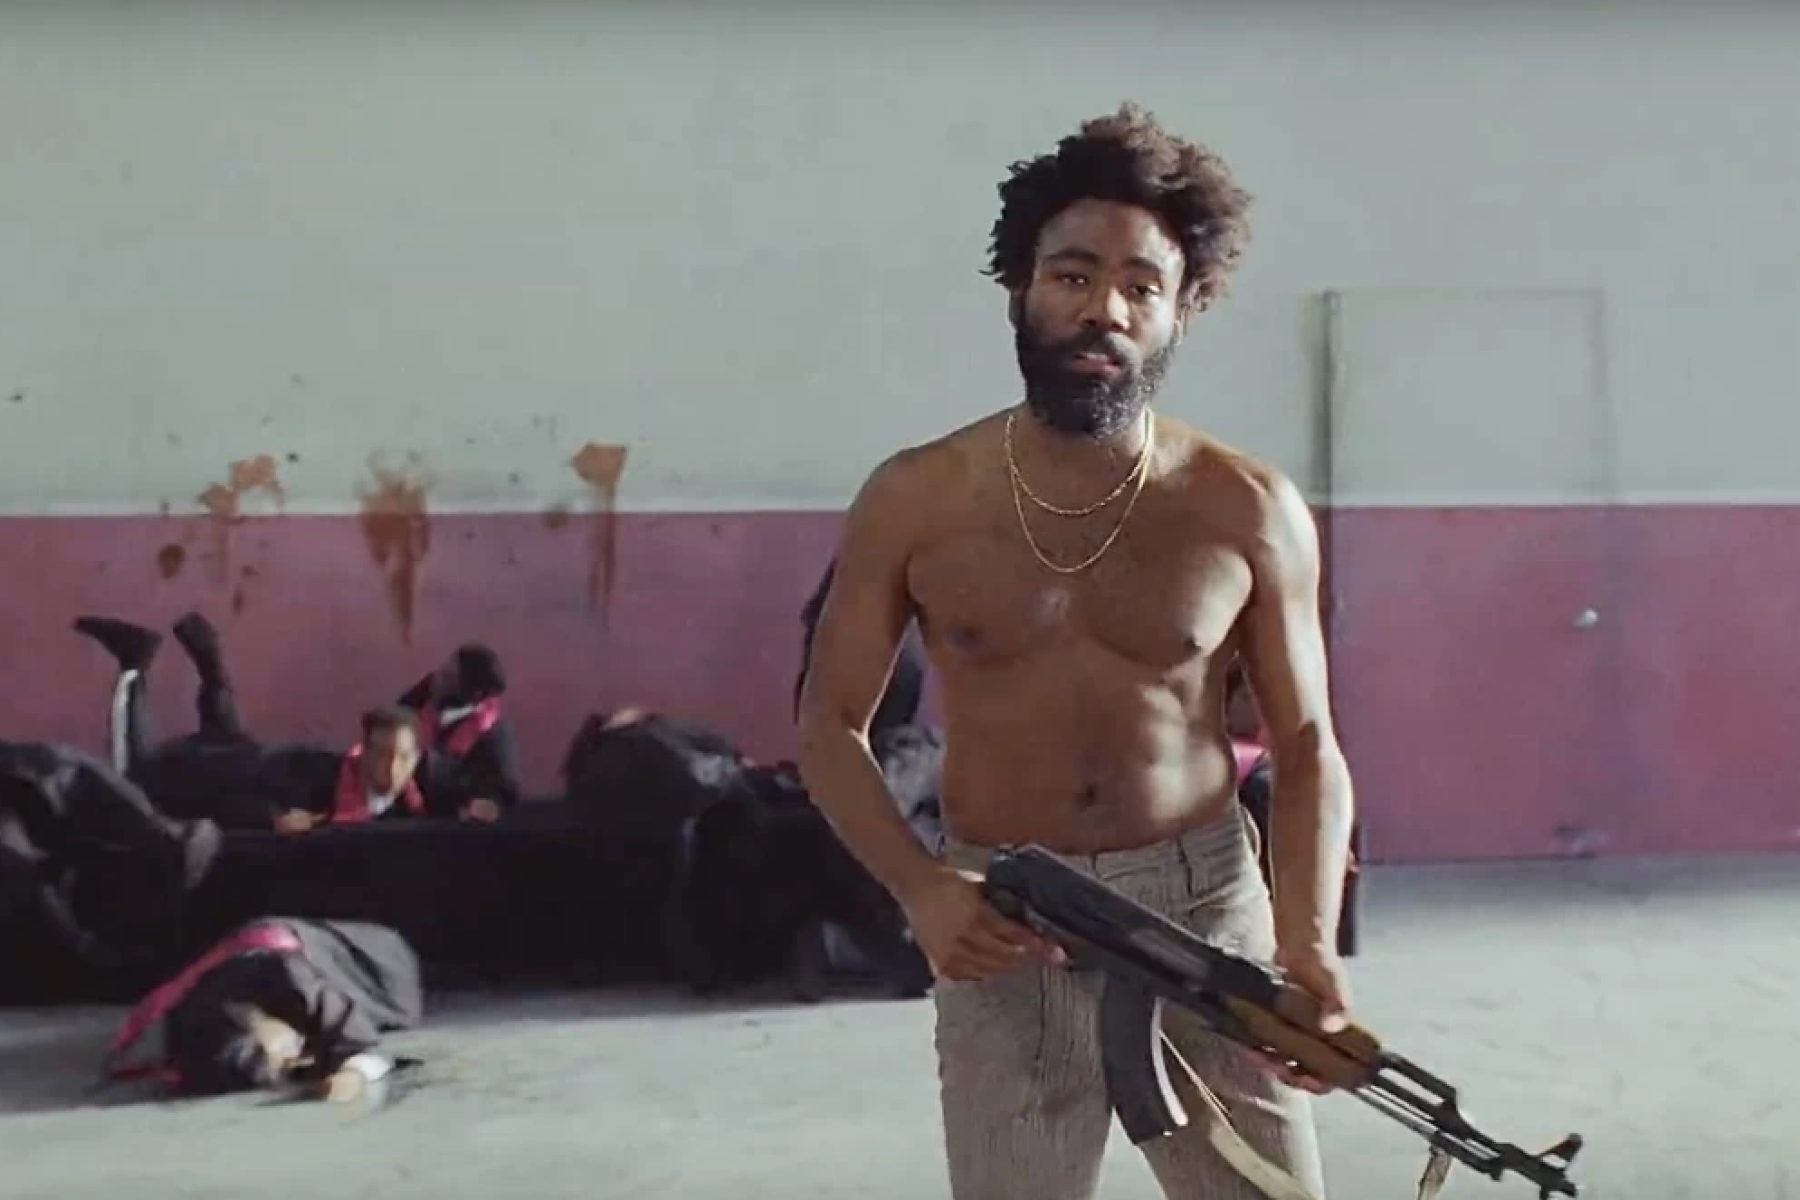 No "Childish Gambino This Is America" memes have been featured ye...